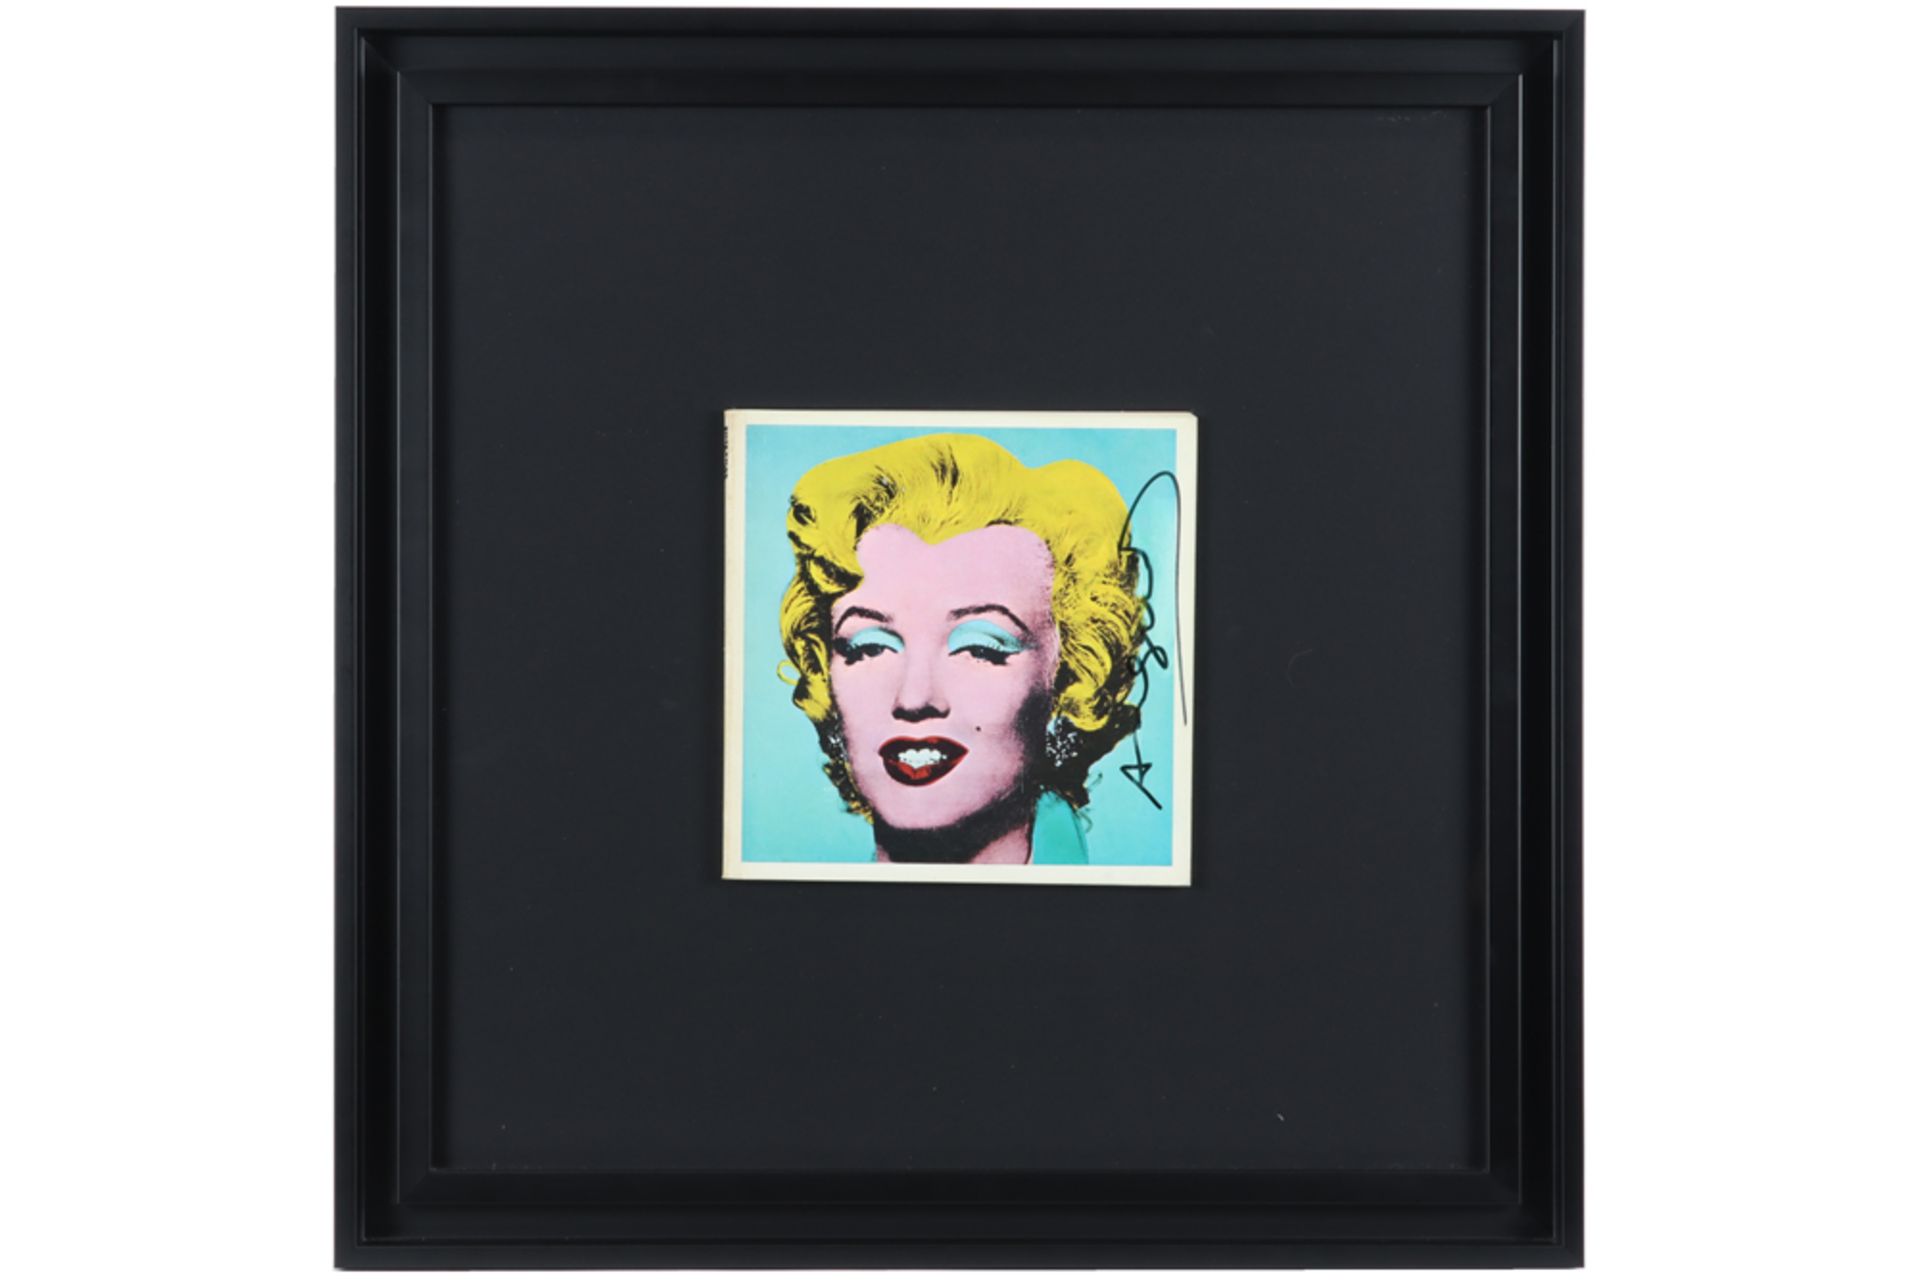 framed Andy Warhol signed catalogue of the 1971 Tate Gallery Exhibition with "Marilyn Monroe" on the - Image 4 of 4